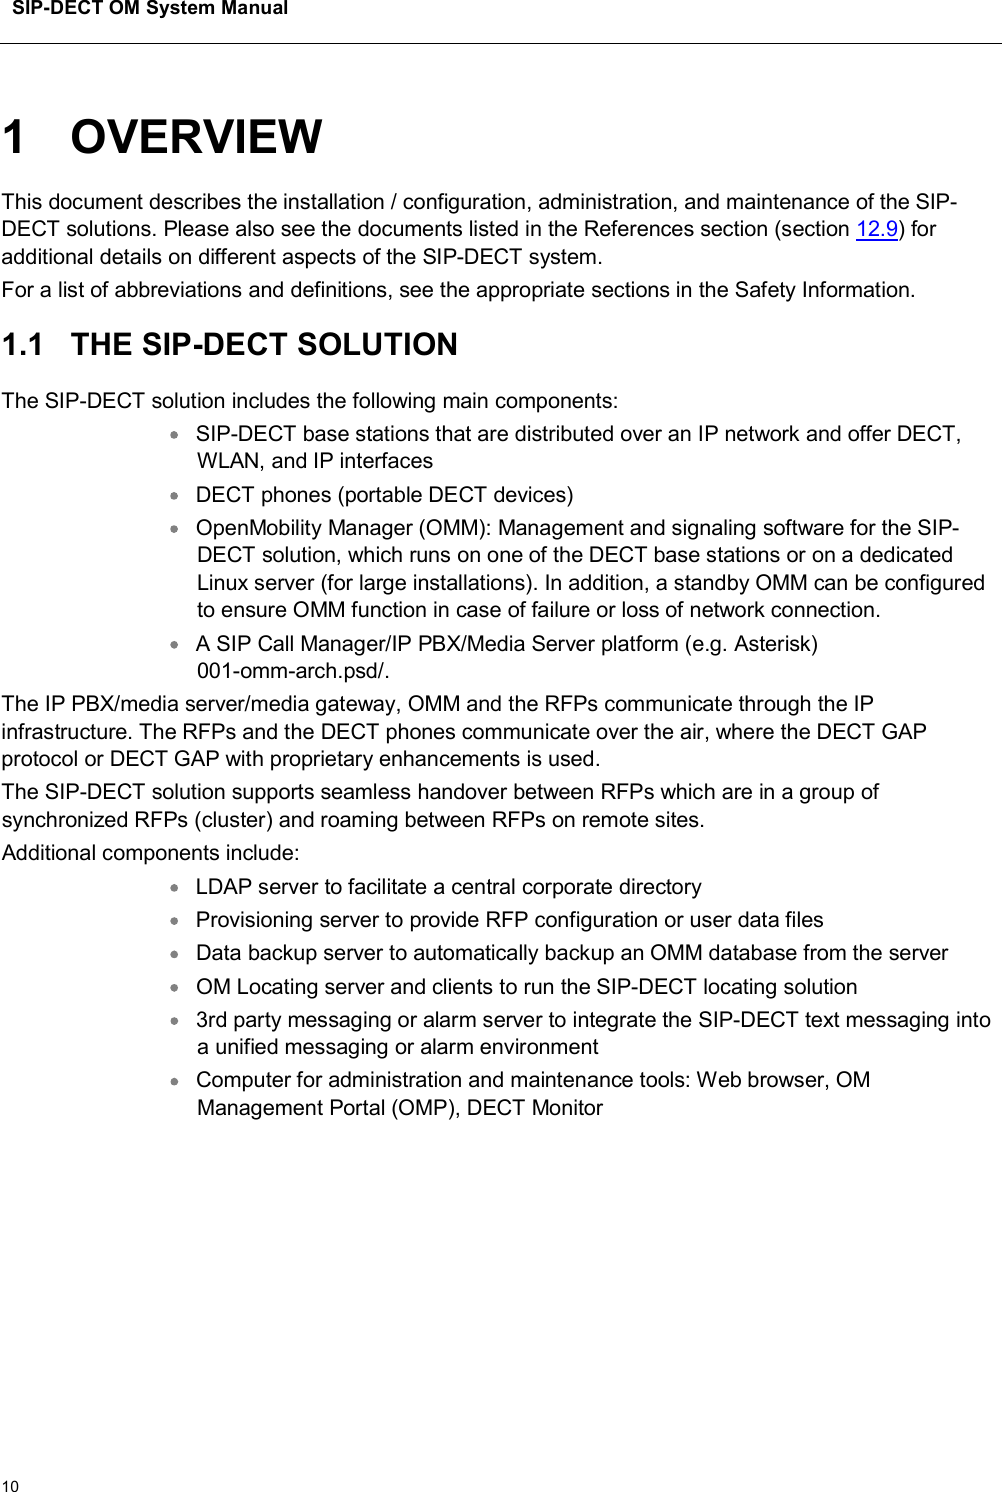 SIP-DECT OM System Manual101 OVERVIEWThis document describes the installation / configuration, administration, and maintenance of the SIP-DECT solutions. Please also see the documents listed in the References section (section 12.9) for additional details on different aspects of the SIP-DECT system. For a list of abbreviations and definitions, see the appropriate sections in the Safety Information.1.1 THE SIP-DECT SOLUTIONThe SIP-DECT solution includes the following main components: SIP-DECT base stations that are distributed over an IP network and offer DECT,WLAN, and IP interfacesDECT phones (portable DECT devices)OpenMobility Manager (OMM): Management and signaling software for the SIP-DECT solution, which runs on one of the DECT base stations or on a dedicated Linux server (for large installations). In addition, a standby OMM can be configured to ensure OMM function in case of failure or loss of network connection. A SIP Call Manager/IP PBX/Media Server platform (e.g. Asterisk)001-omm-arch.psd/.The IP PBX/media server/media gateway, OMM and the RFPs communicate through the IP infrastructure. The RFPs and the DECT phones communicate over the air, where the DECT GAP protocol or DECT GAP with proprietary enhancements is used. The SIP-DECT solution supports seamless handover between RFPs which are in a group of synchronized RFPs (cluster) and roaming between RFPs on remote sites. Additional components include:LDAP server to facilitate a central corporate directoryProvisioning server to provide RFP configuration or user data files Data backup server to automatically backup an OMM database from the serverOM Locating server and clients to run the SIP-DECT locating solution3rd party messaging or alarm server to integrate the SIP-DECT text messaging into a unified messaging or alarm environmentComputer for administration and maintenance tools: Web browser, OM Management Portal (OMP), DECT Monitor